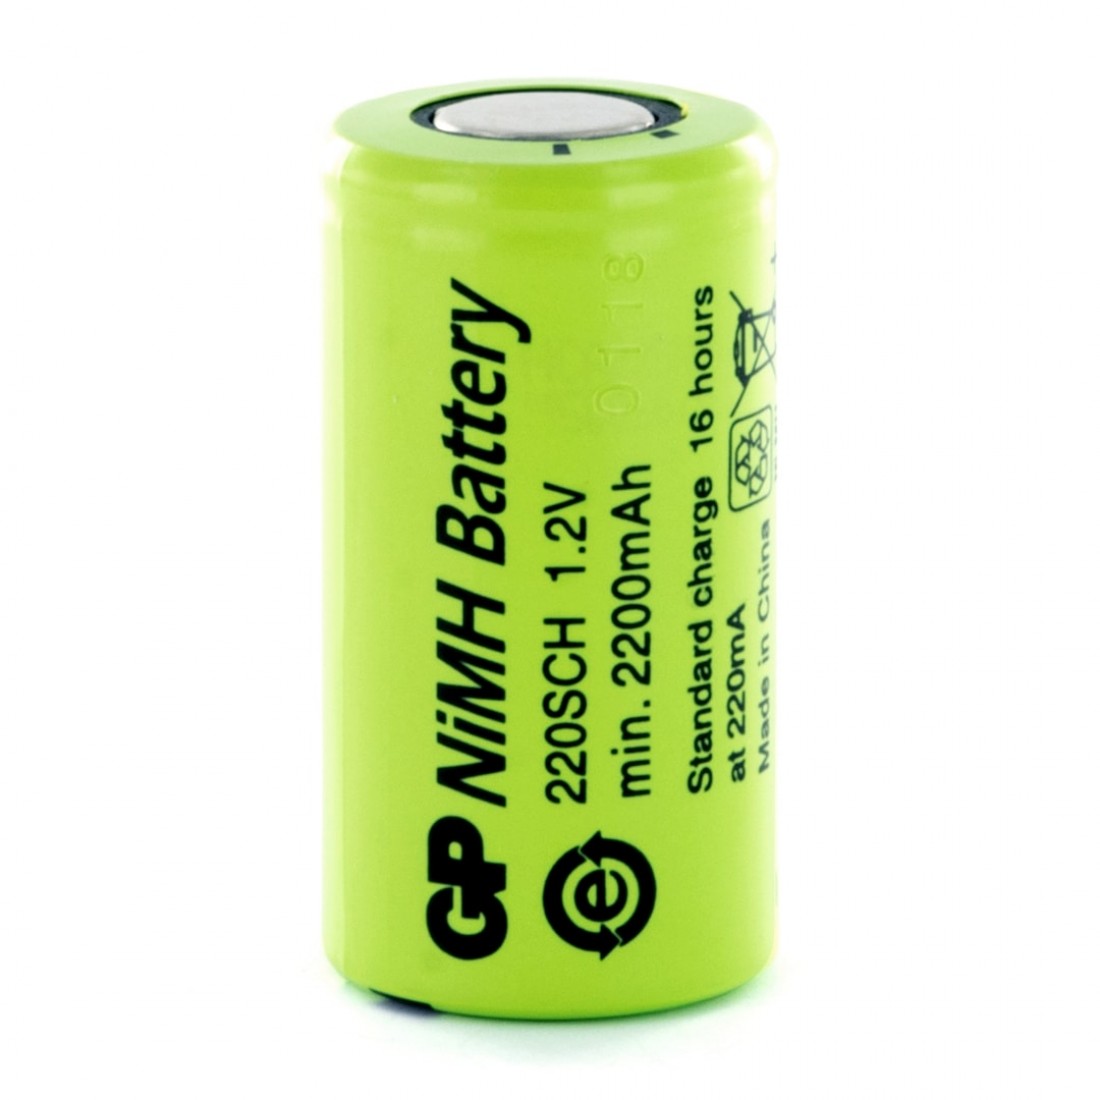 Gp 650. Баттери 1,5 Rechargeable. Rechargeable Battery c0114. Rechargeable Battery AA1.2V 2300 Mah. Аккумулятор GP 4891199164507.